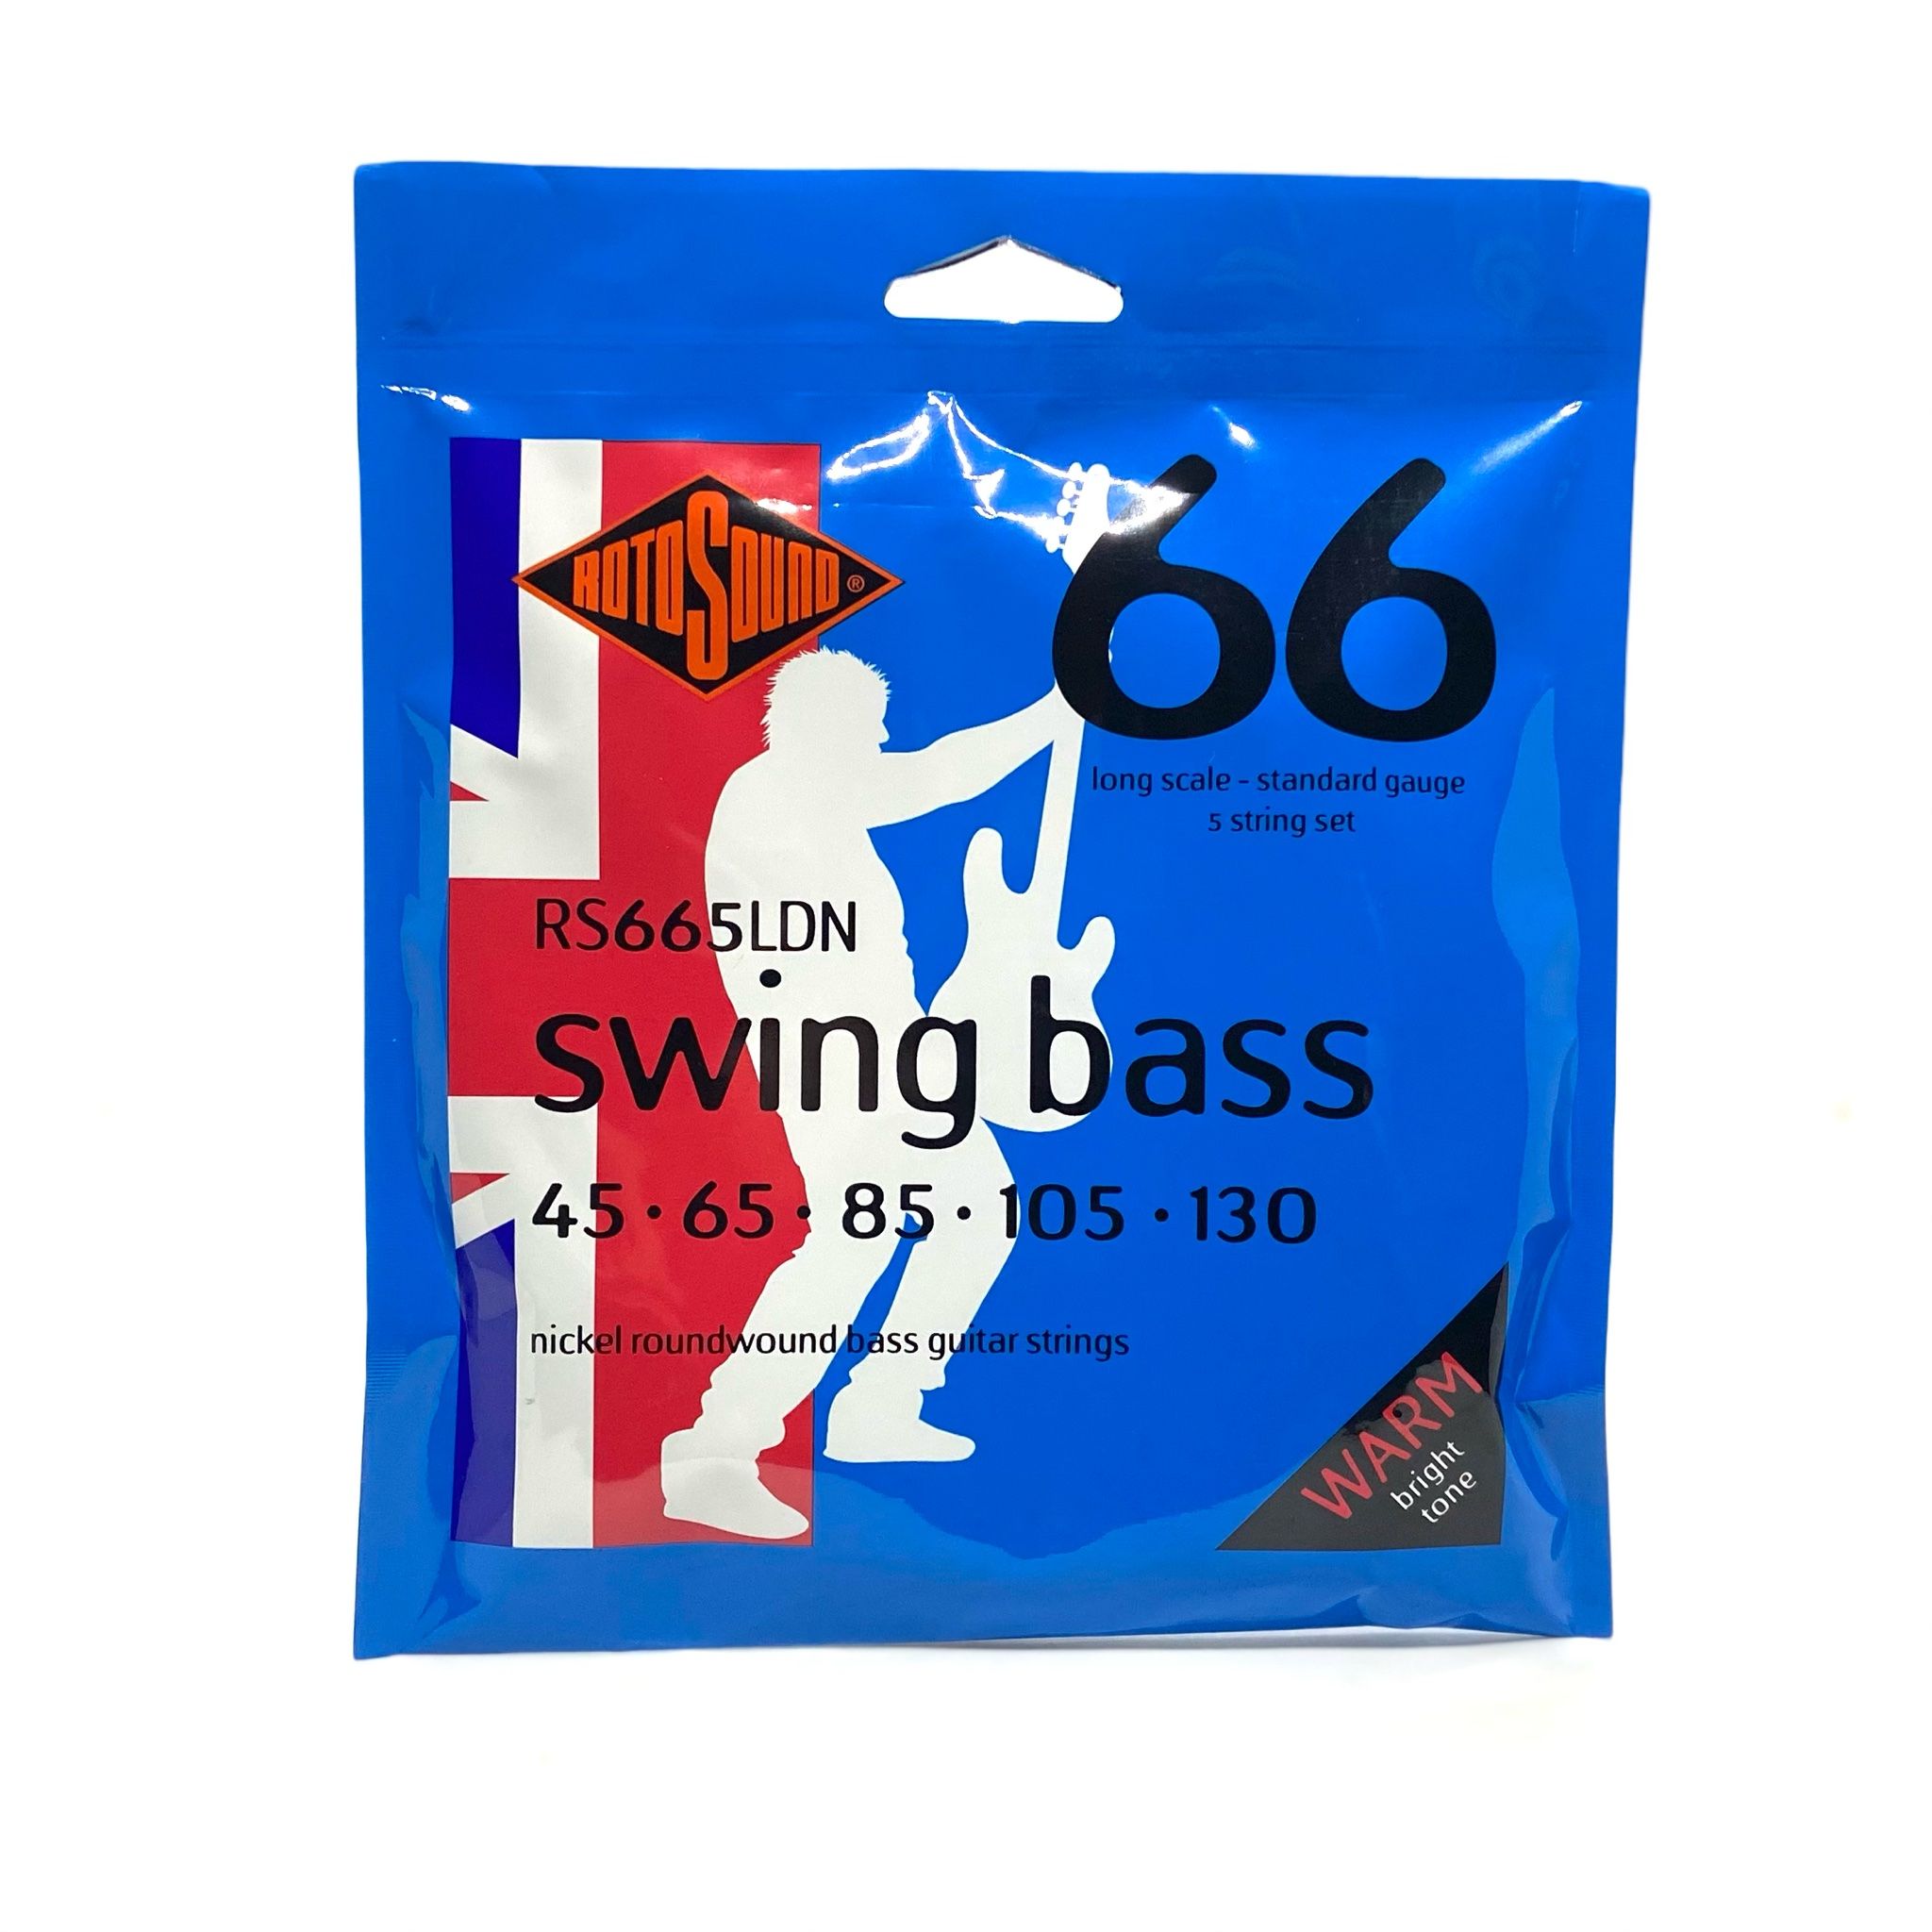  Rotosound Swing Bass RS665LDN, 5-String, 45-130 